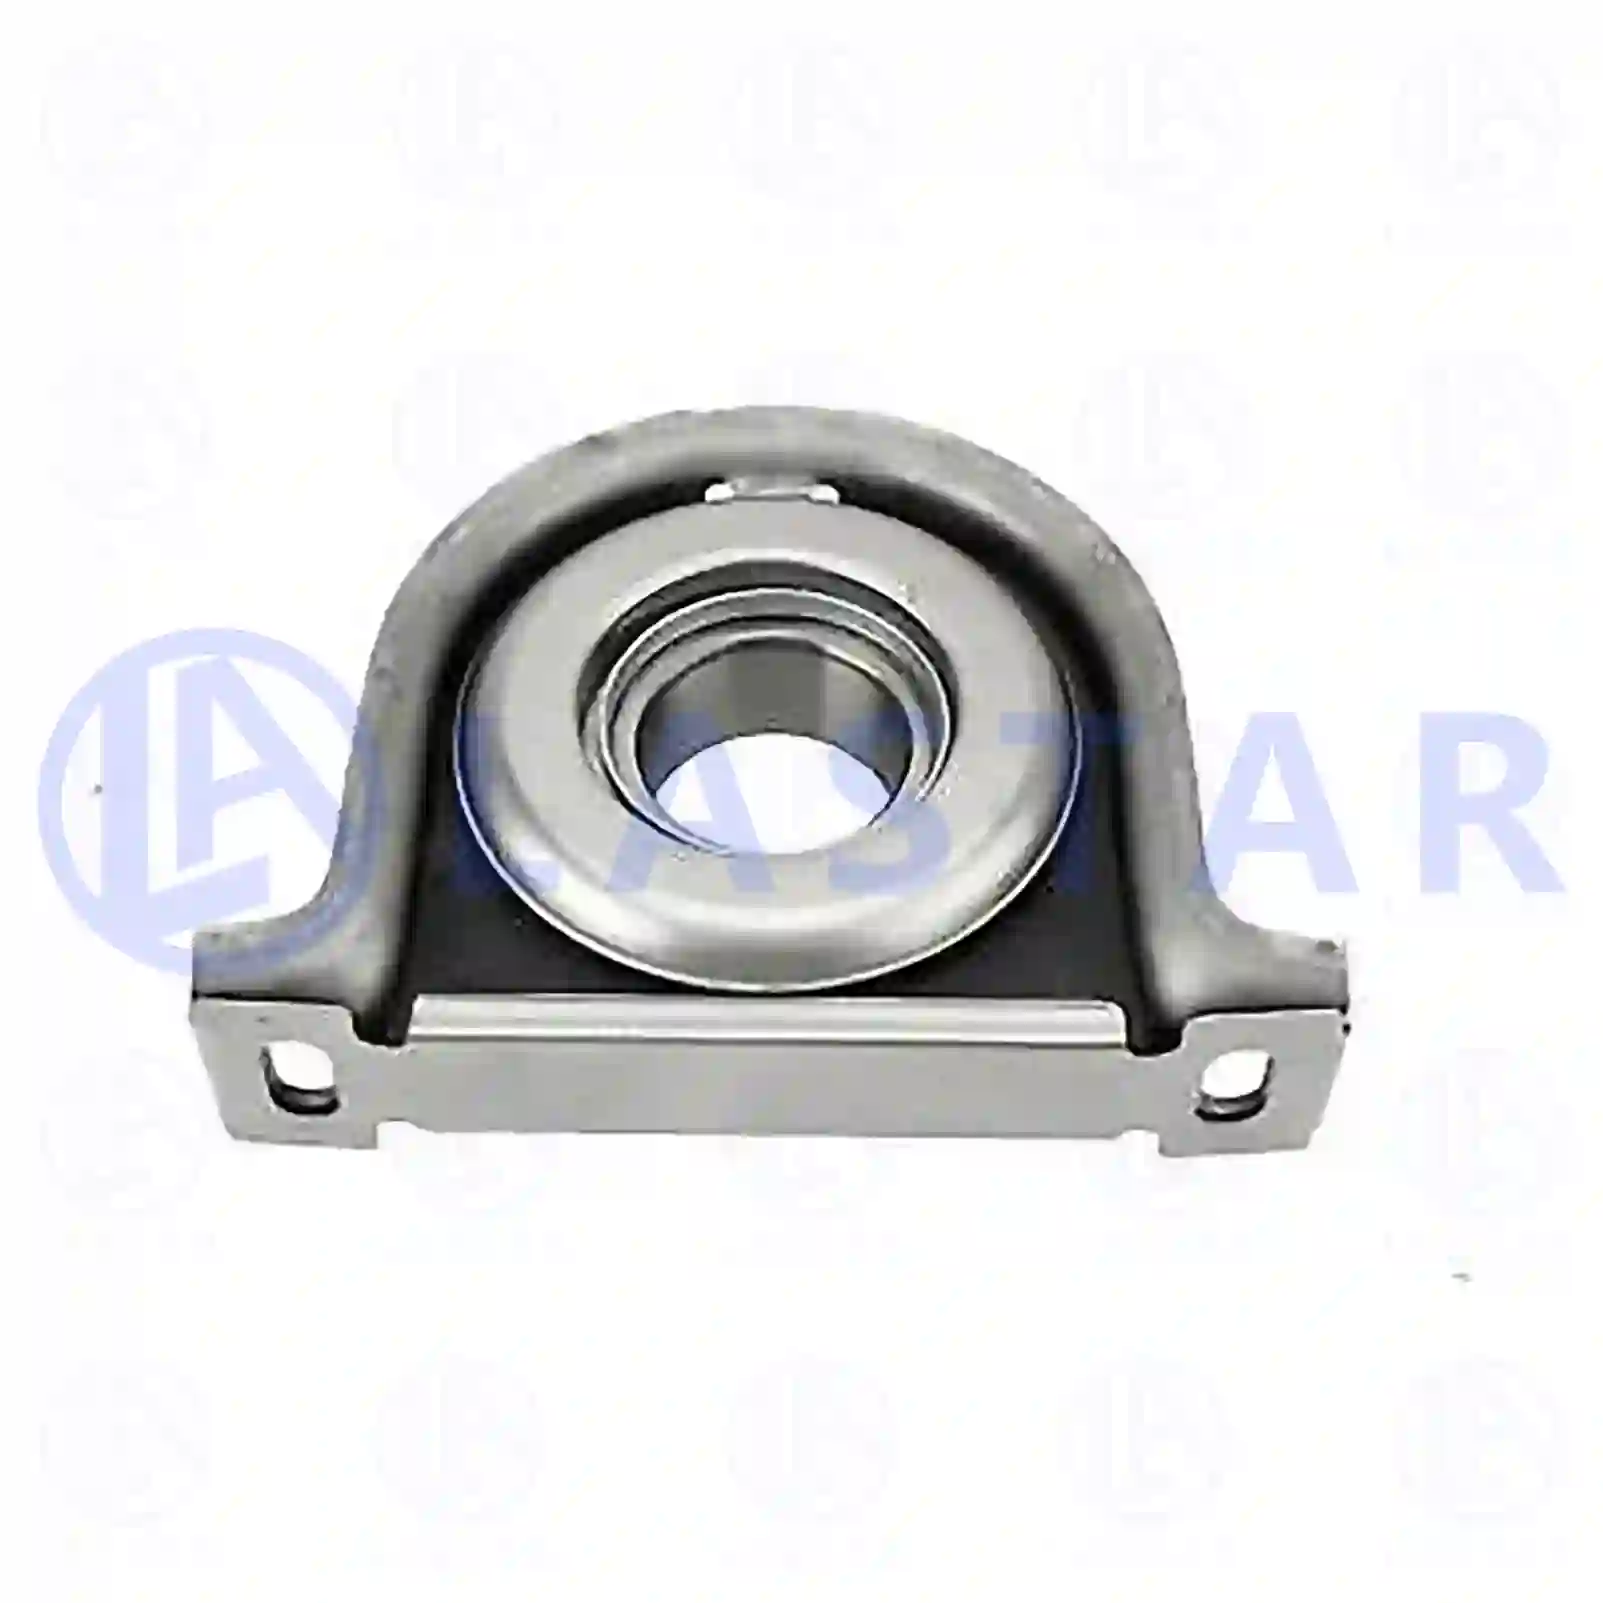 Center bearing, 77734324, 5000819188, 50018 ||  77734324 Lastar Spare Part | Truck Spare Parts, Auotomotive Spare Parts Center bearing, 77734324, 5000819188, 50018 ||  77734324 Lastar Spare Part | Truck Spare Parts, Auotomotive Spare Parts